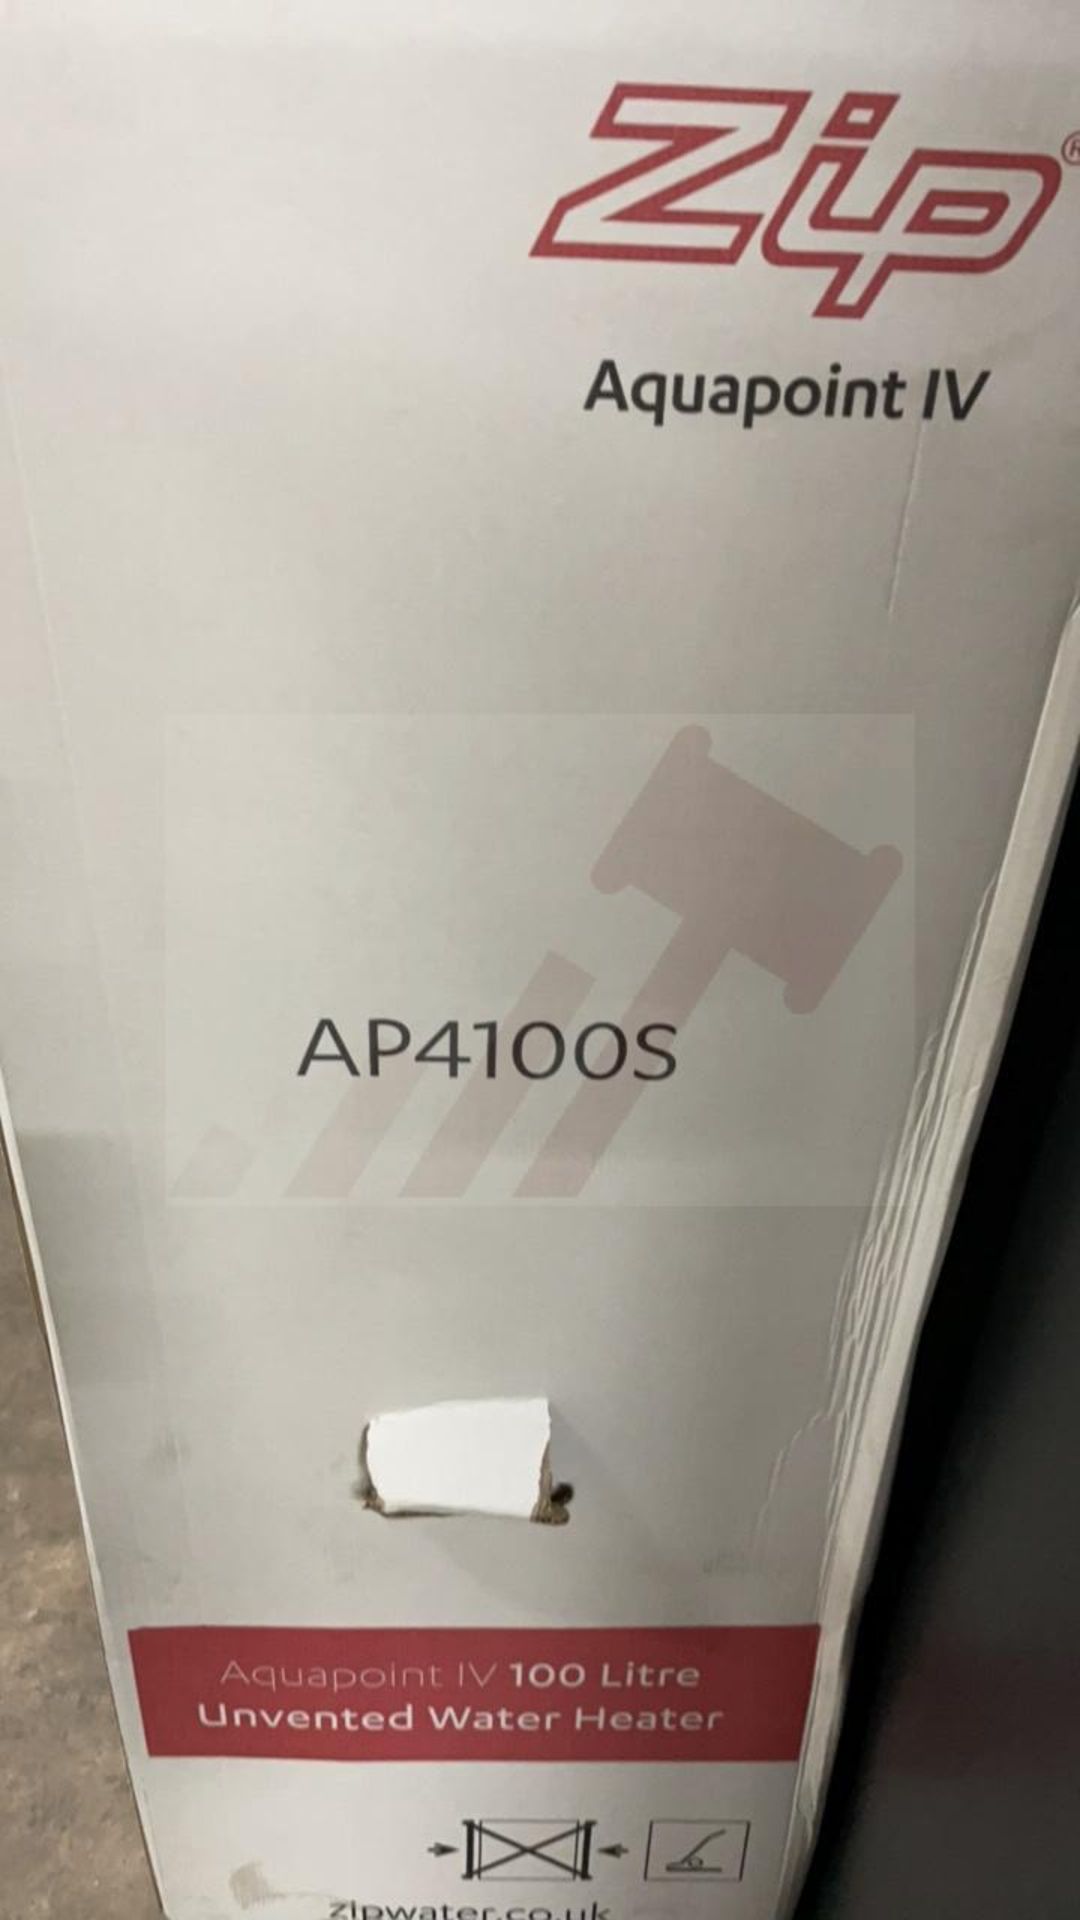 Aquapoint IV 100 litre Unvented Water Heater | Boxed - Image 3 of 7